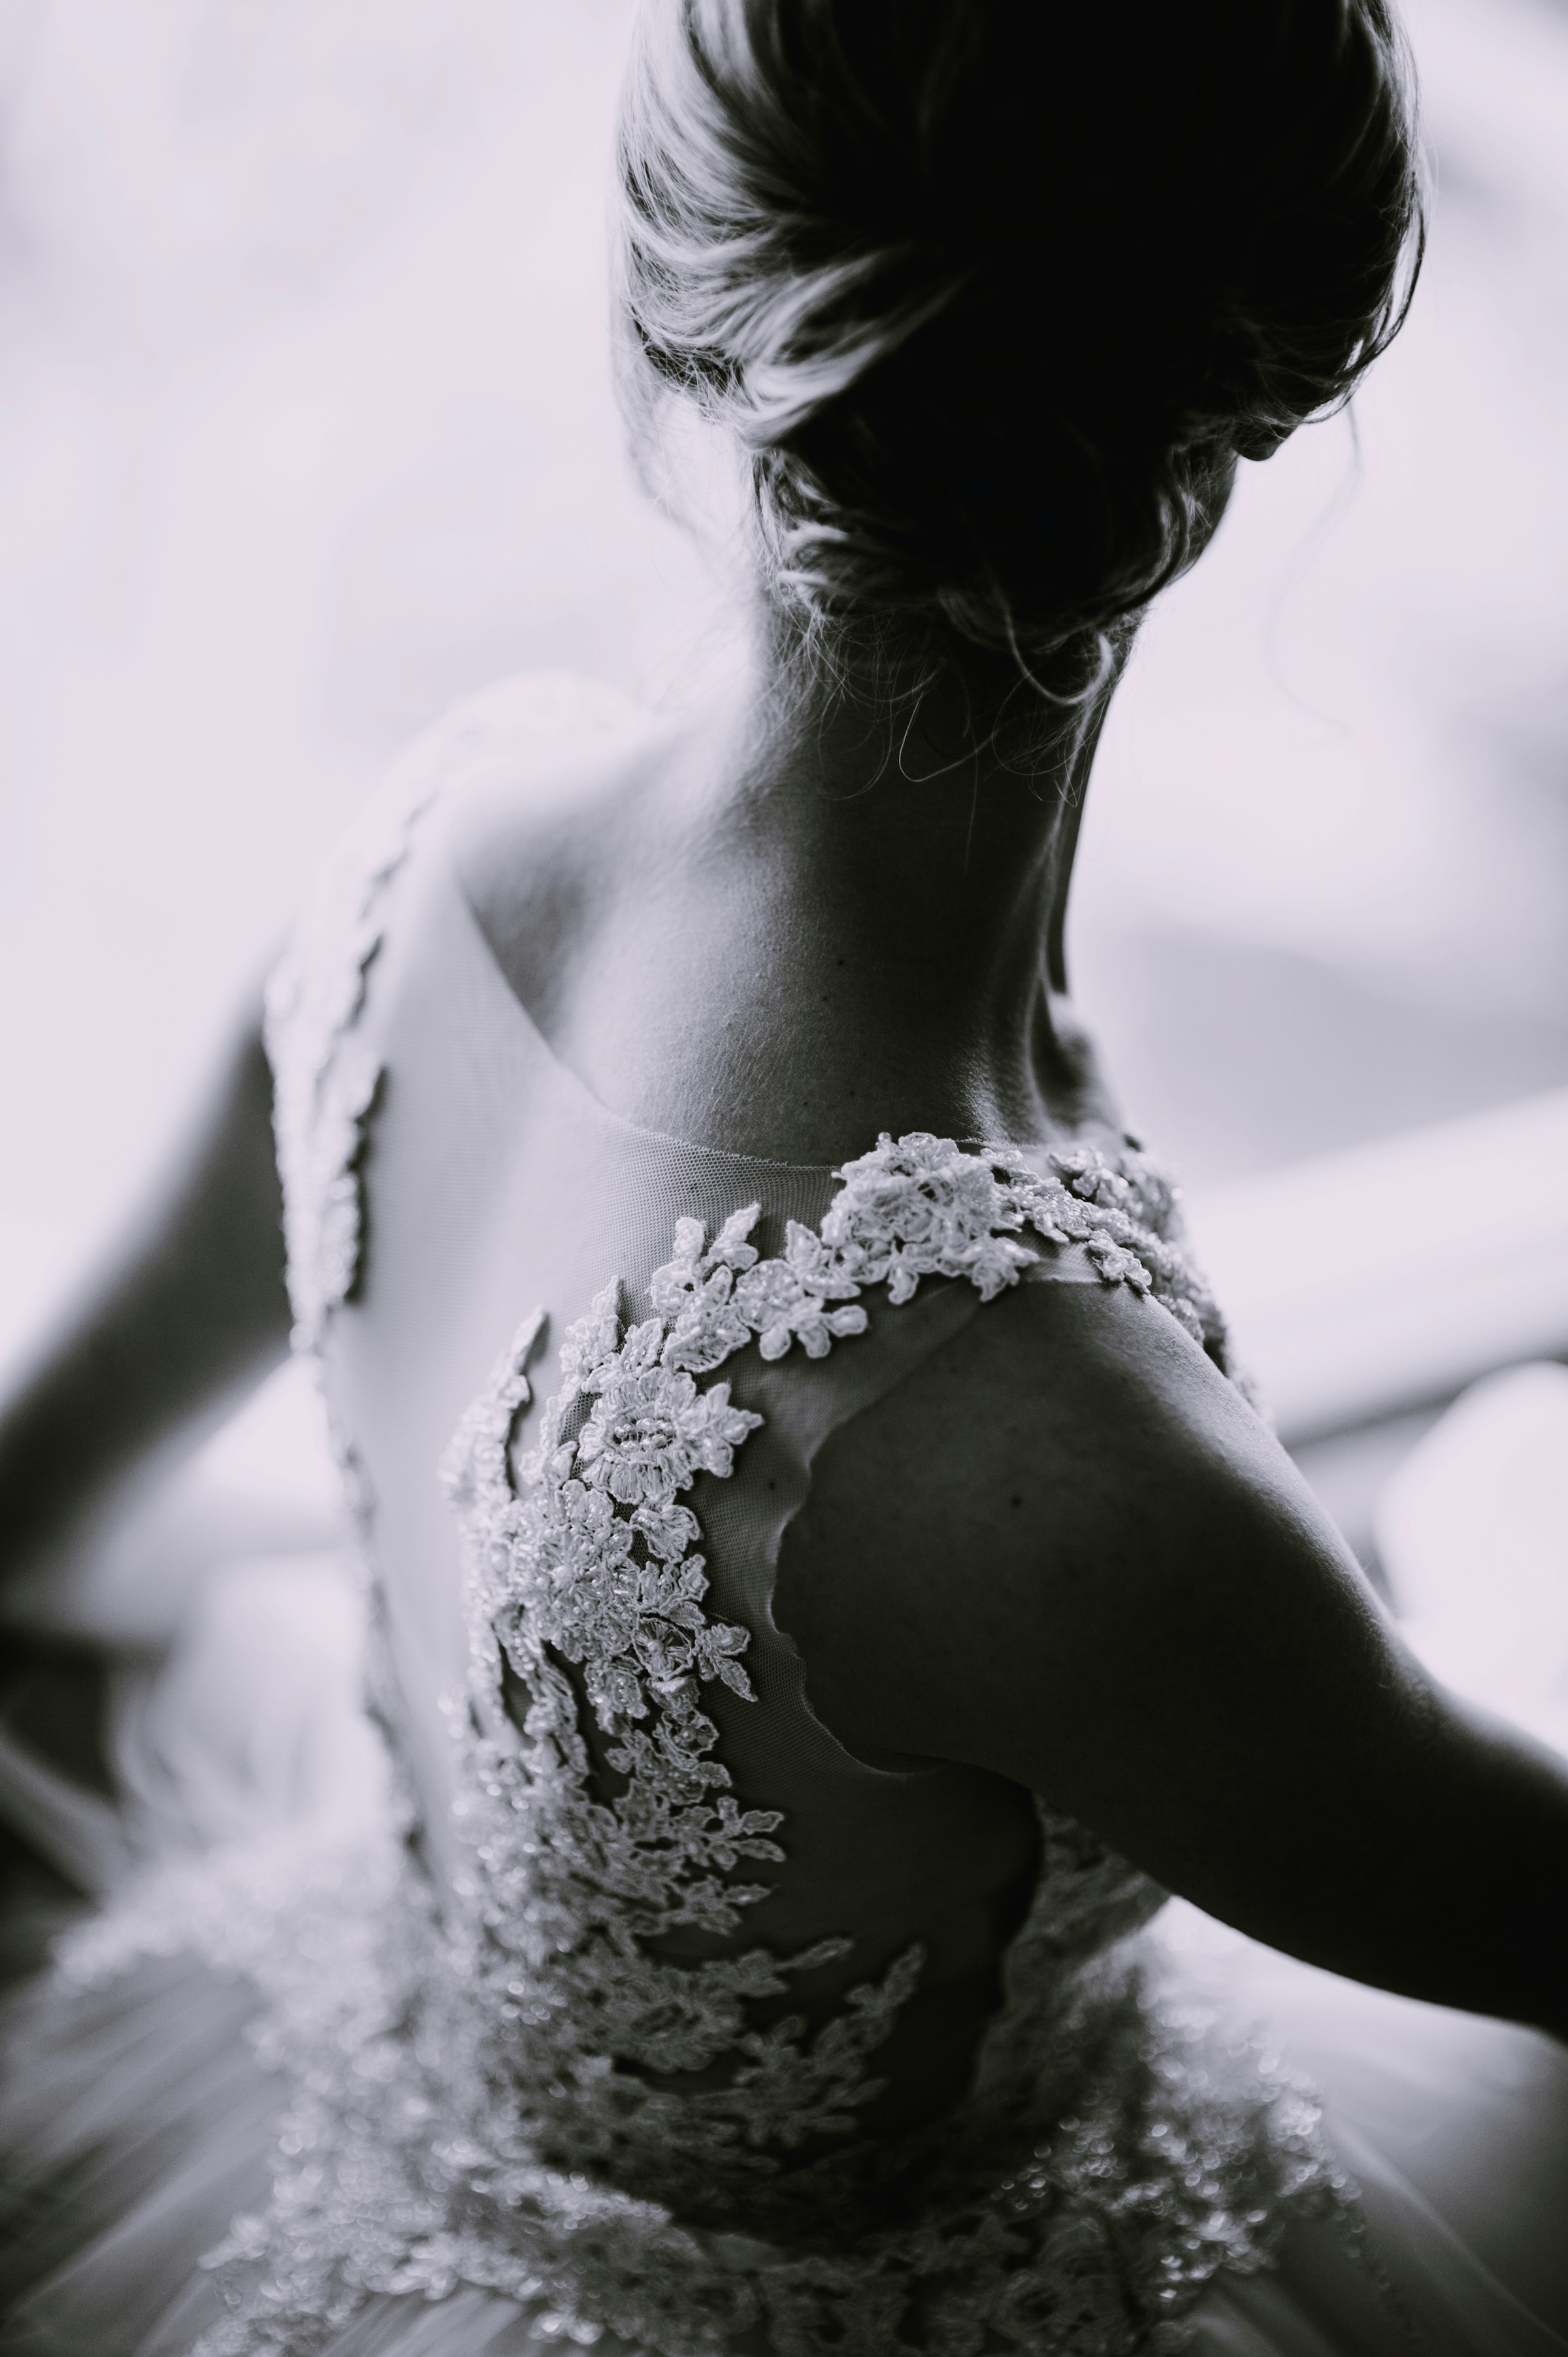 A happy and excited bride | Source: Unsplash